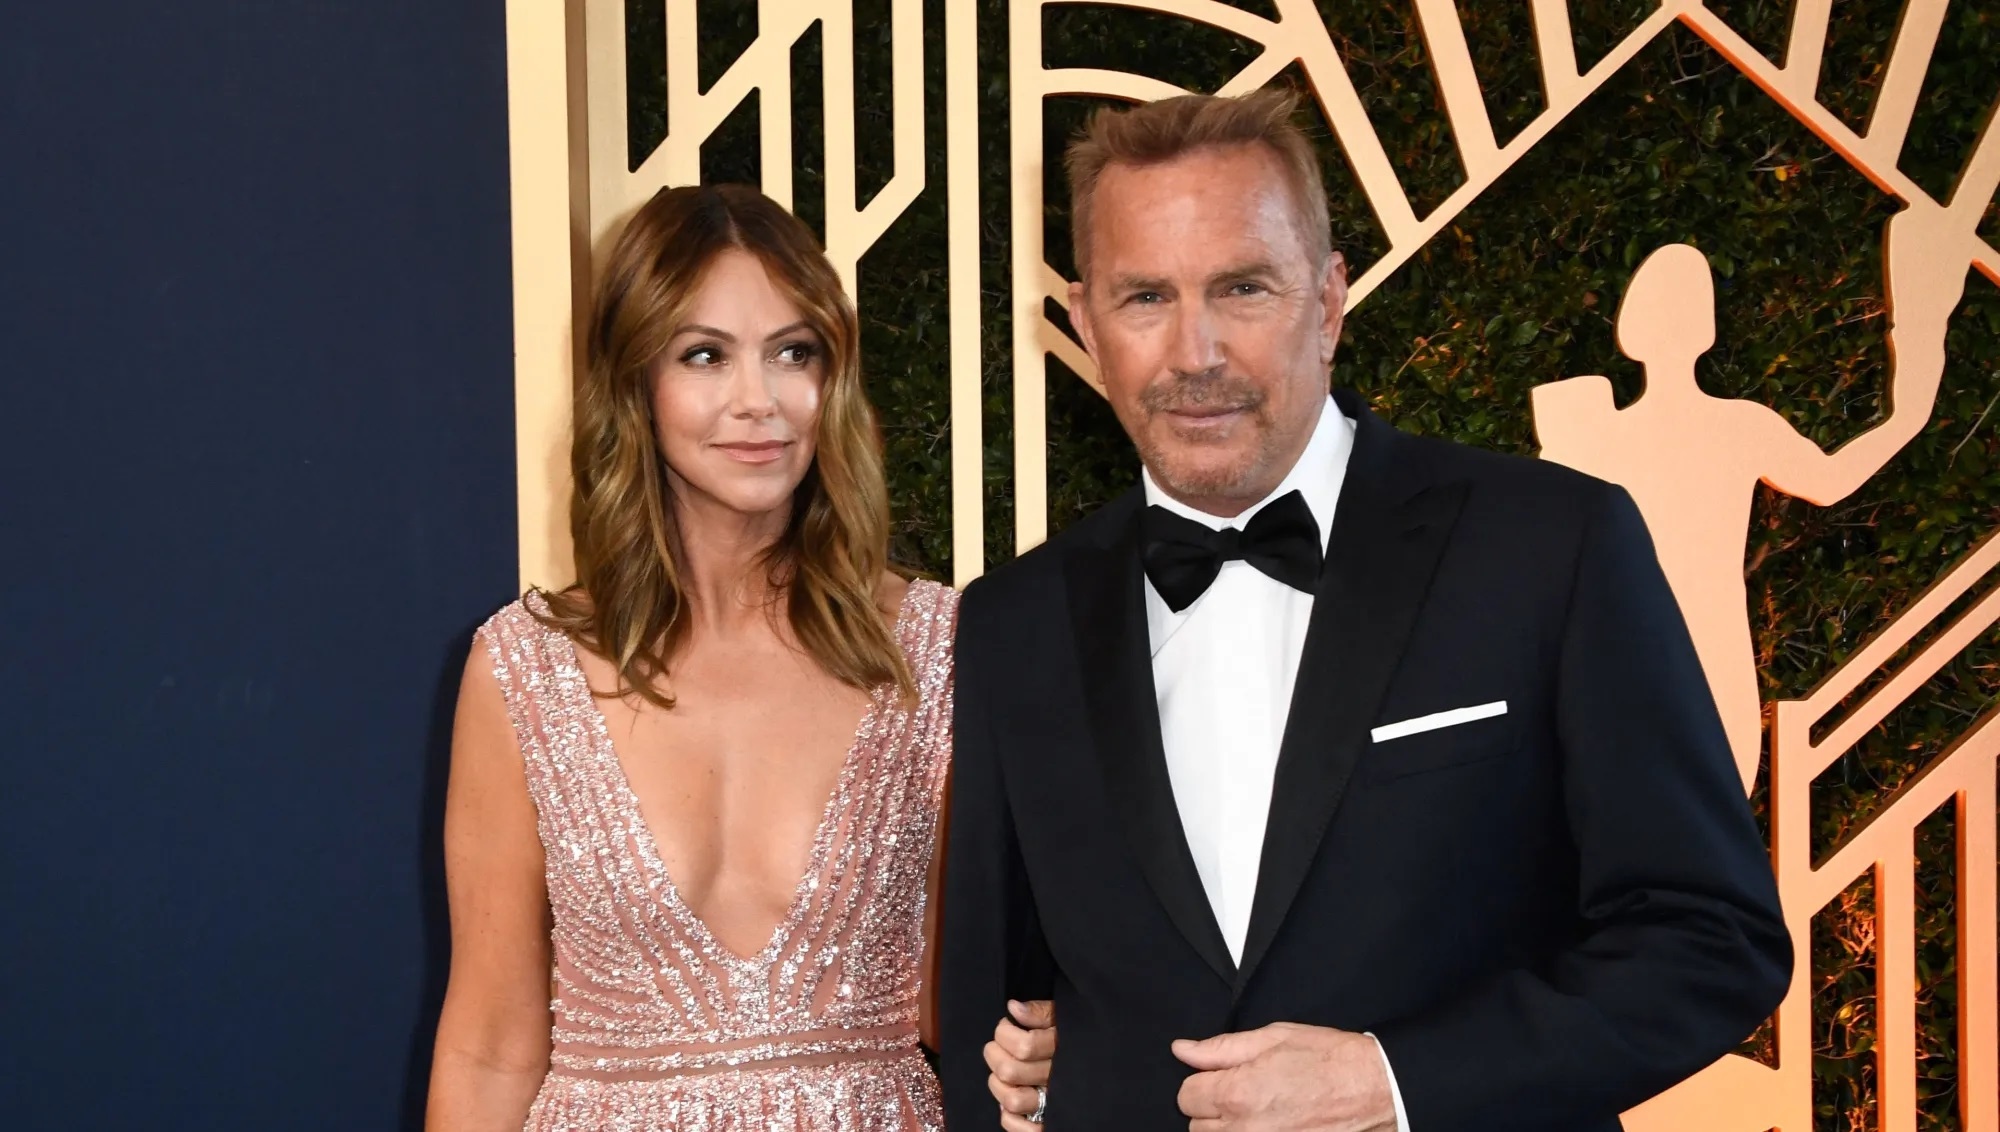 Kevin Costner suffers he no longer knows what to do to throw his ex out of the luxurious mansion they shared